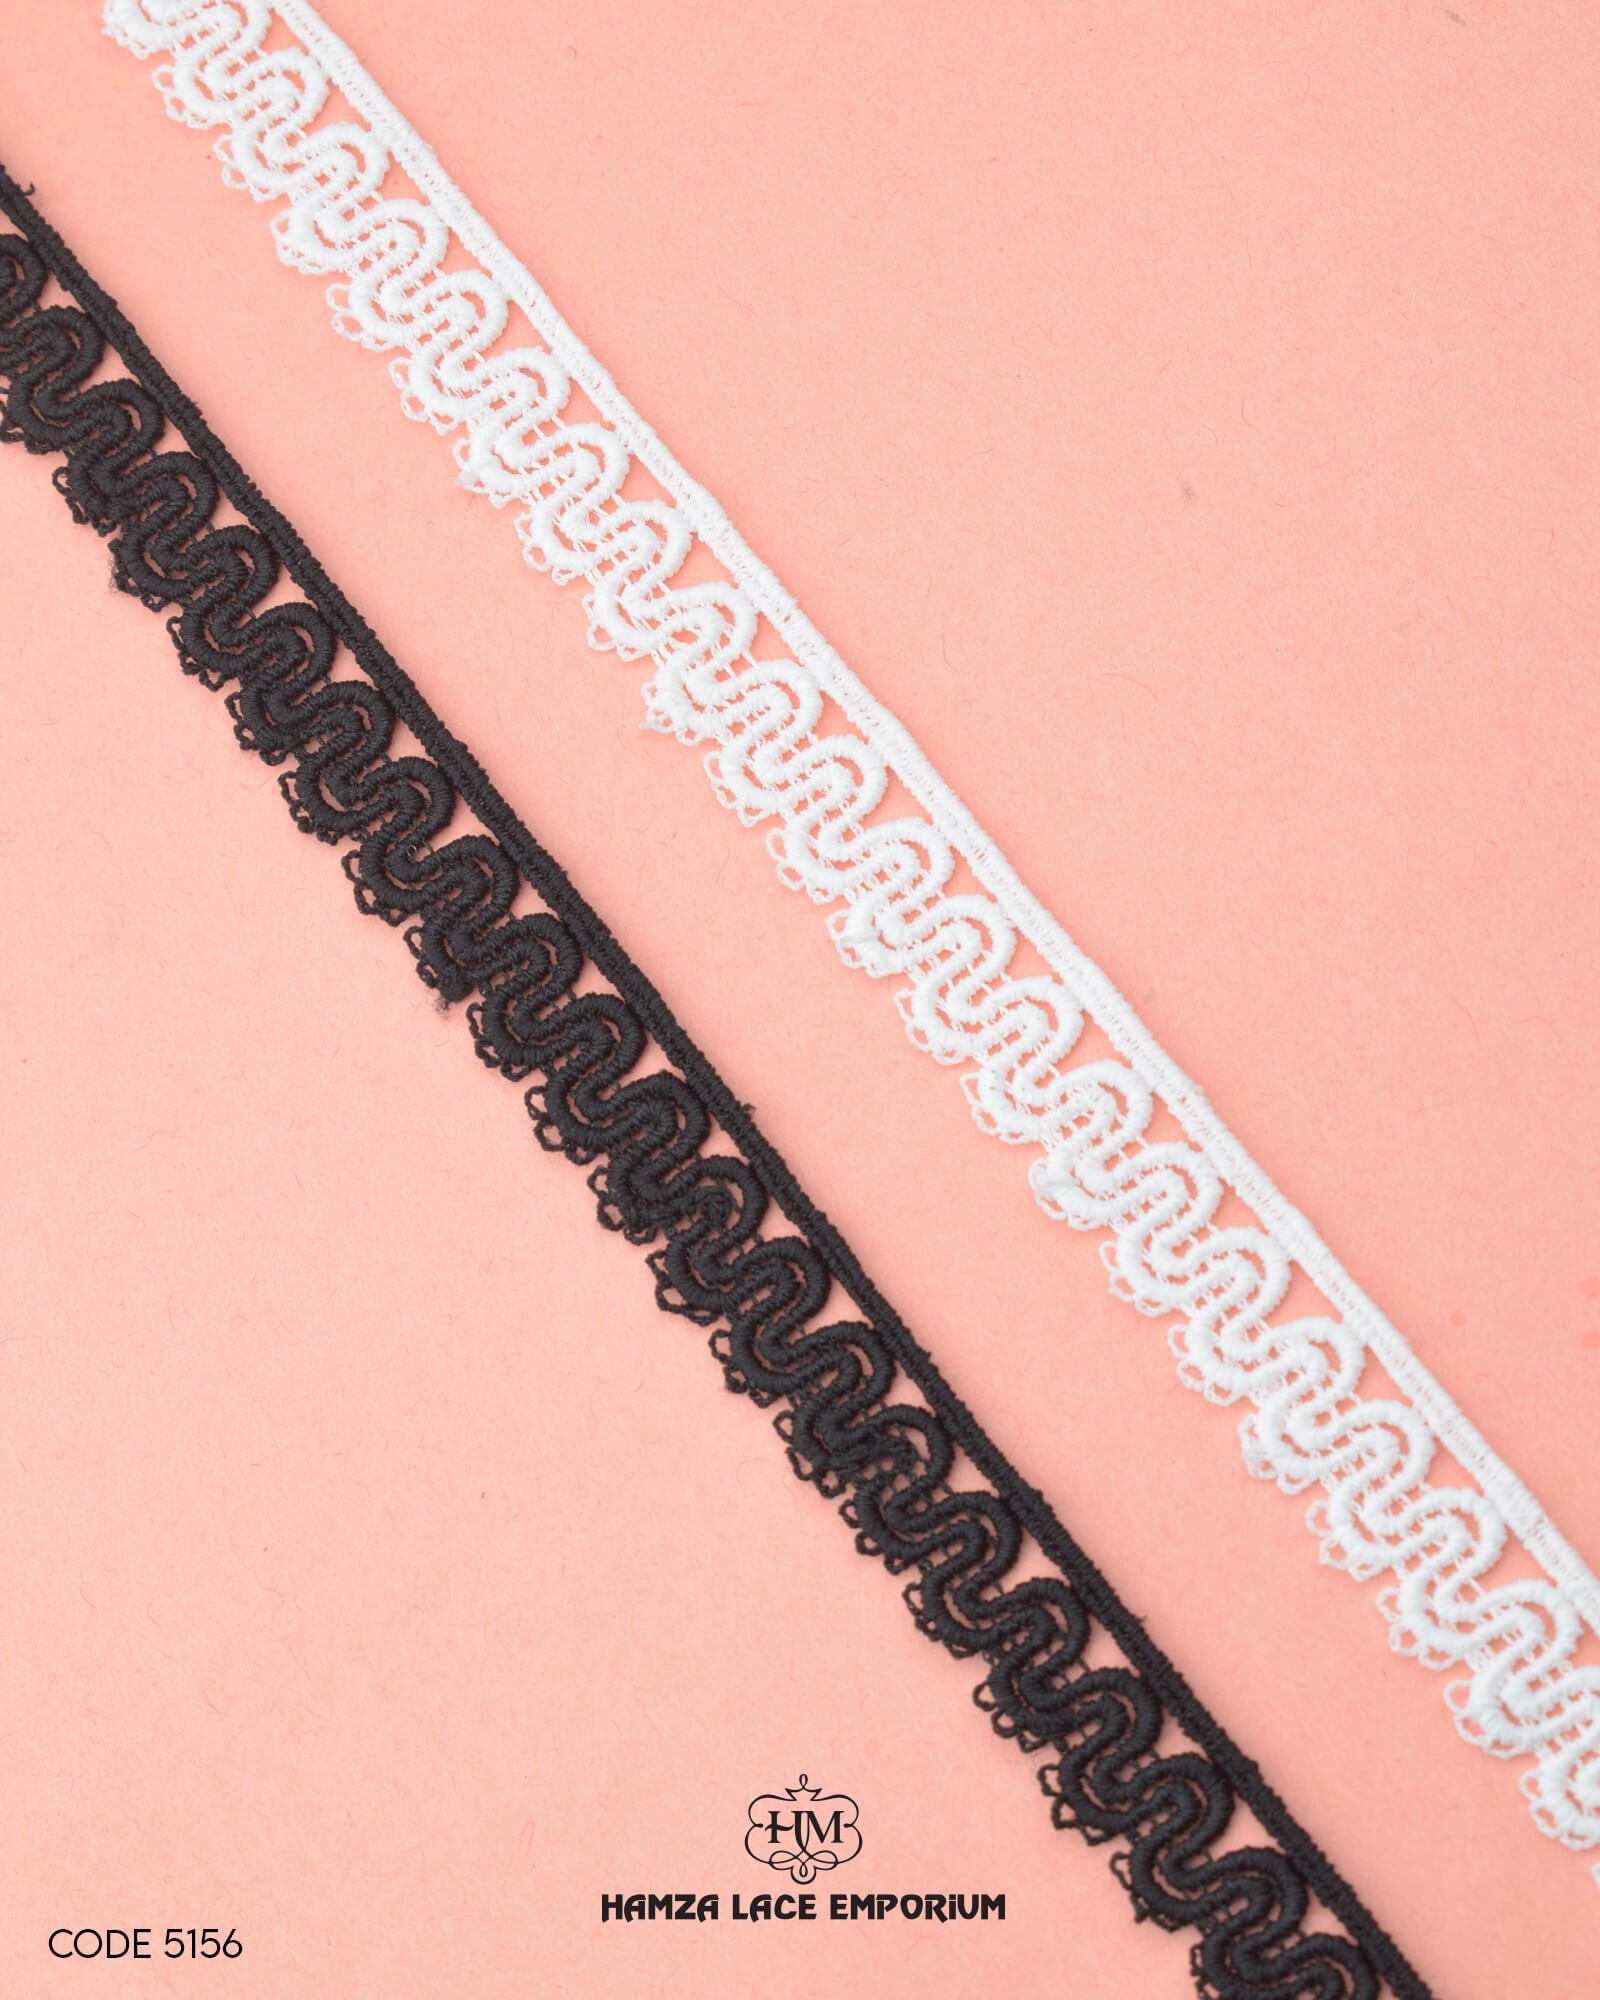 'Edging Scallop Lace 5156' with the 'Hamza Lace' sign